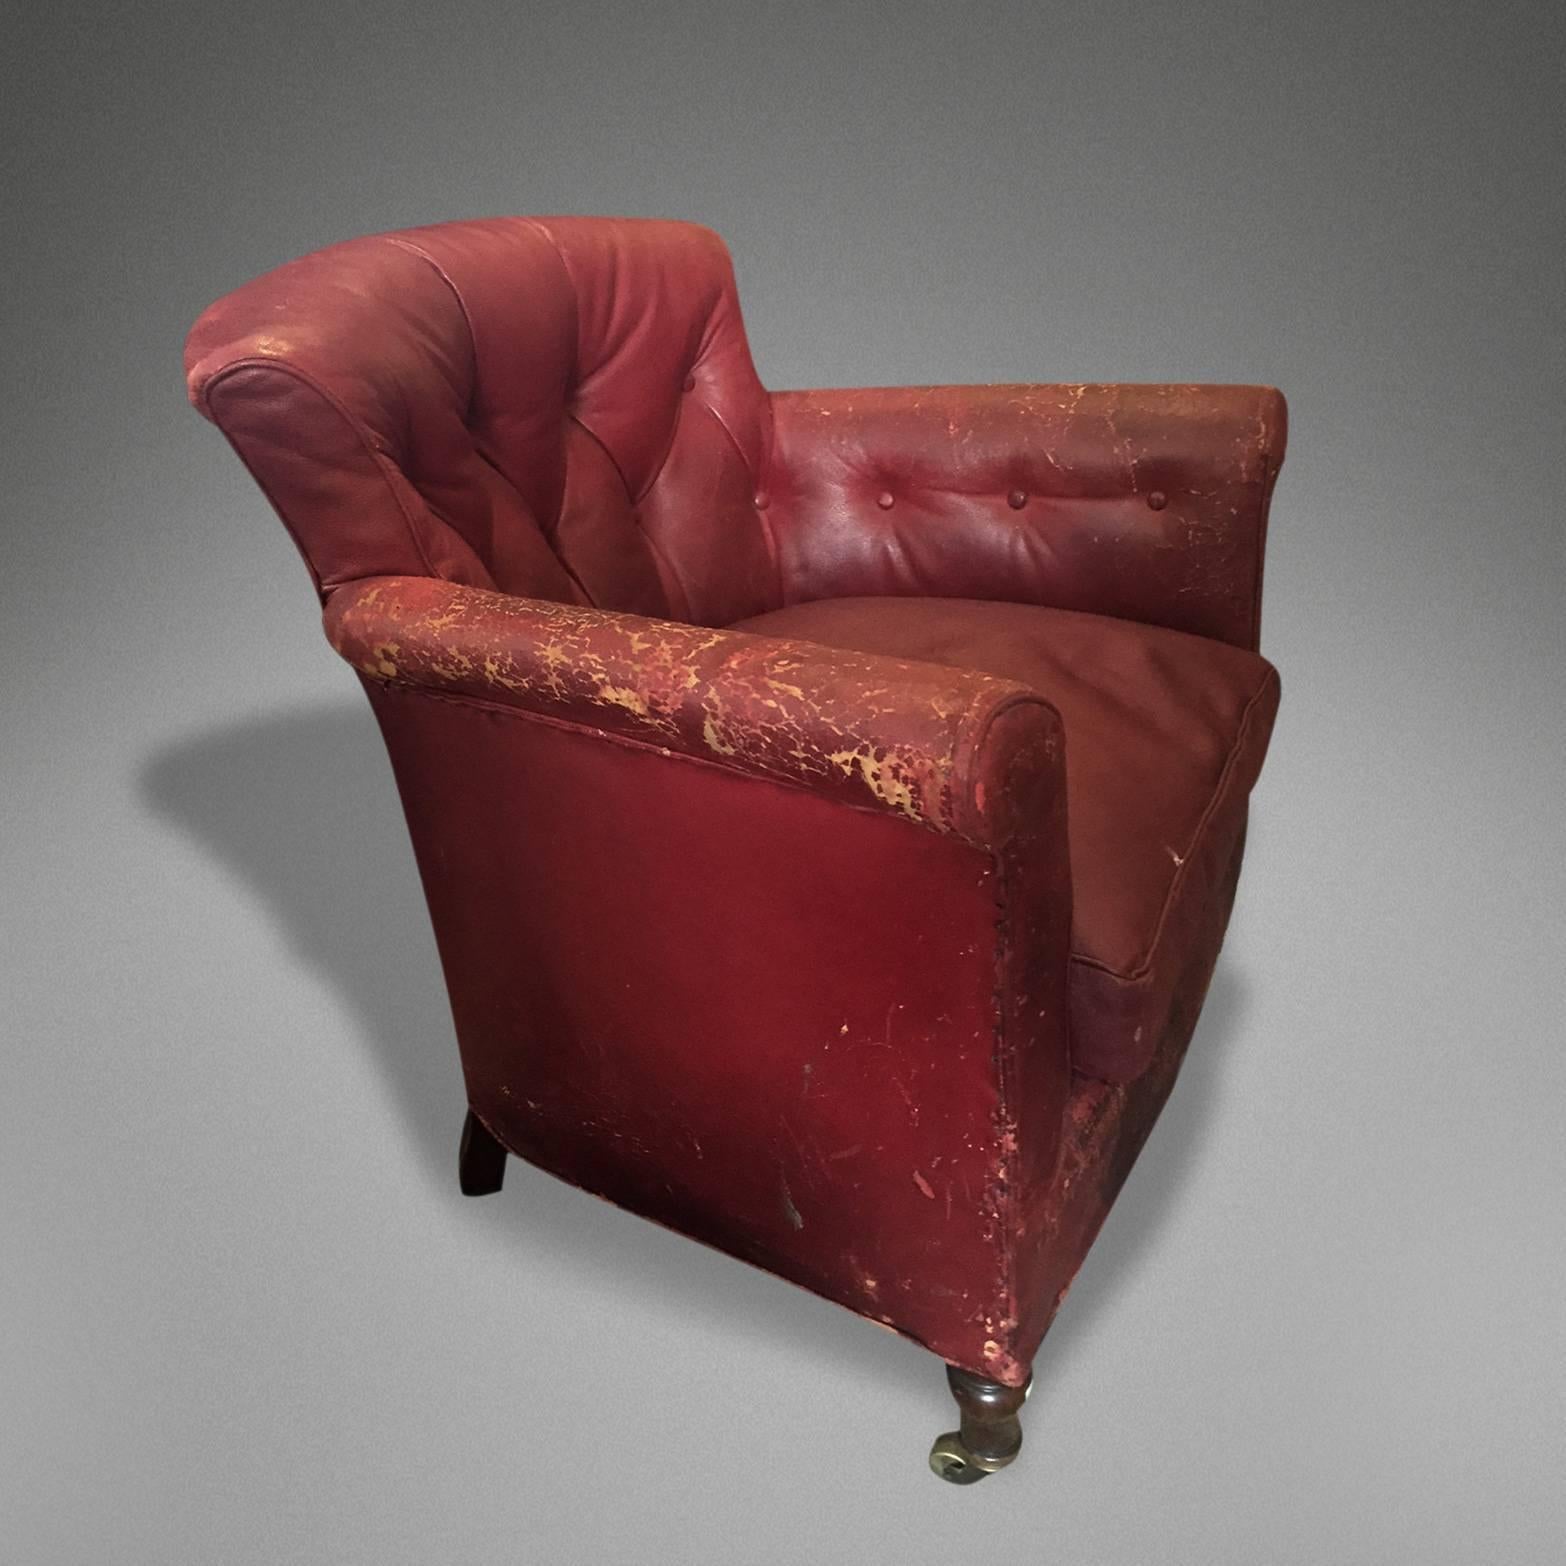 A 19th century Howard & Sons red leather armchair.